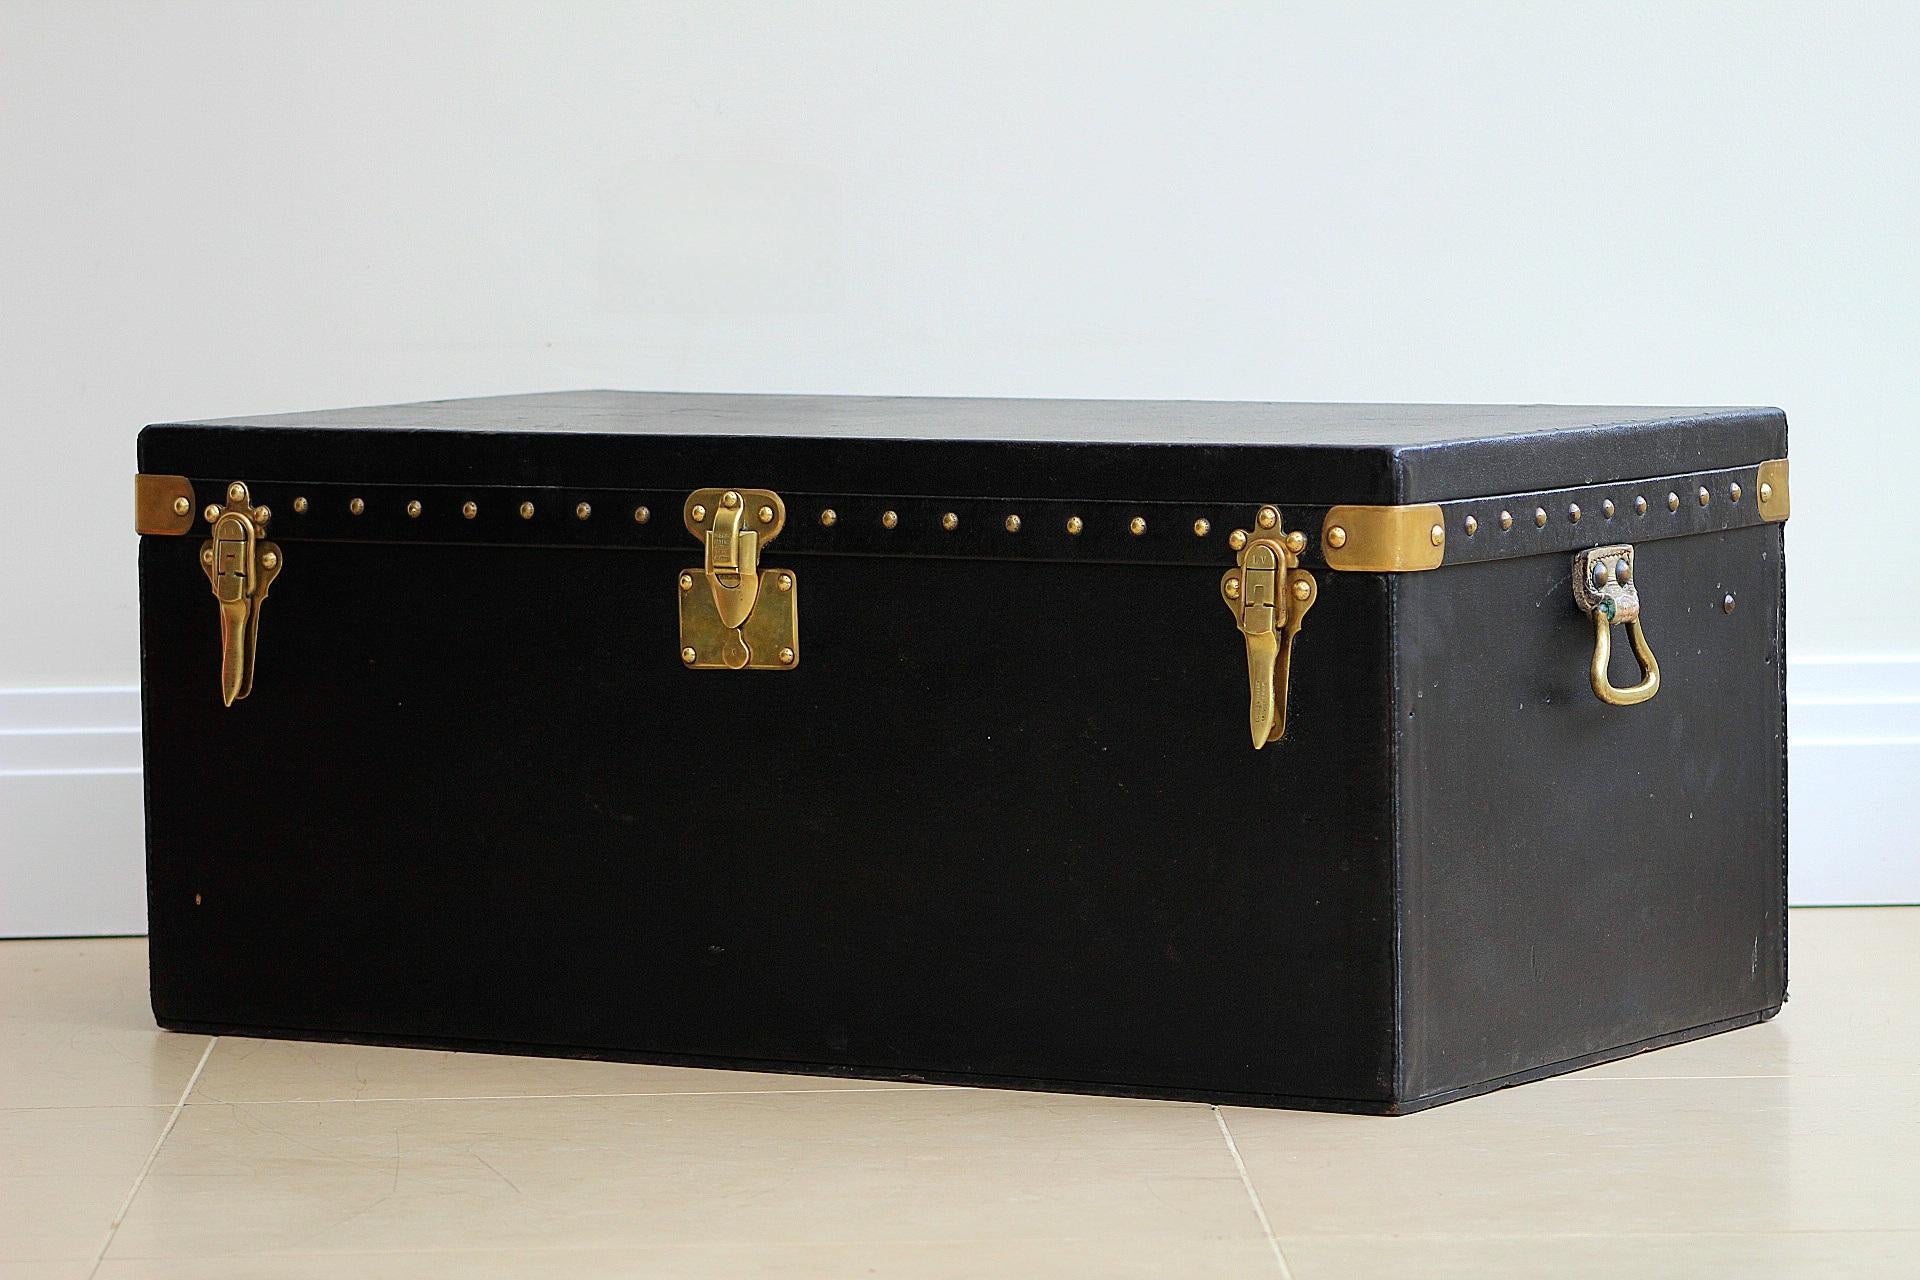 In Luxury We Trust is delighted to present an extraordinary opportunity to own an extremely rare trunk, the largest picnic trunk ever crafted by Louis Vuitton, designed to cater to six people. This trunk is a standout piece, boasting impeccable